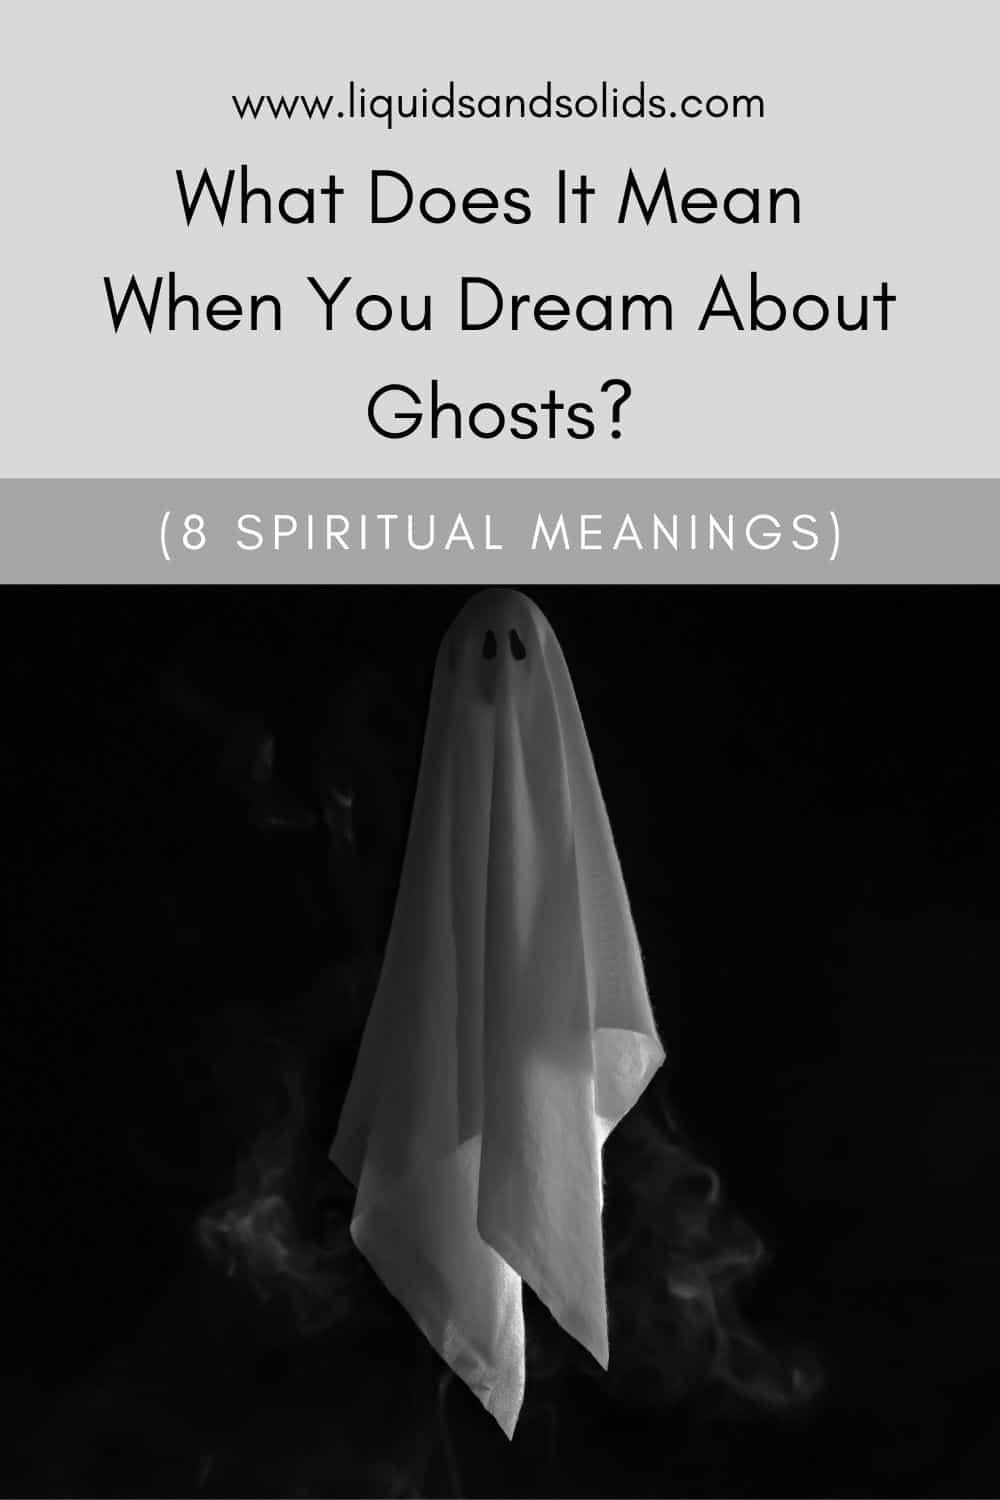 What Does It Mean When You Dream About Ghosts? (8 Spiritual Meanings)